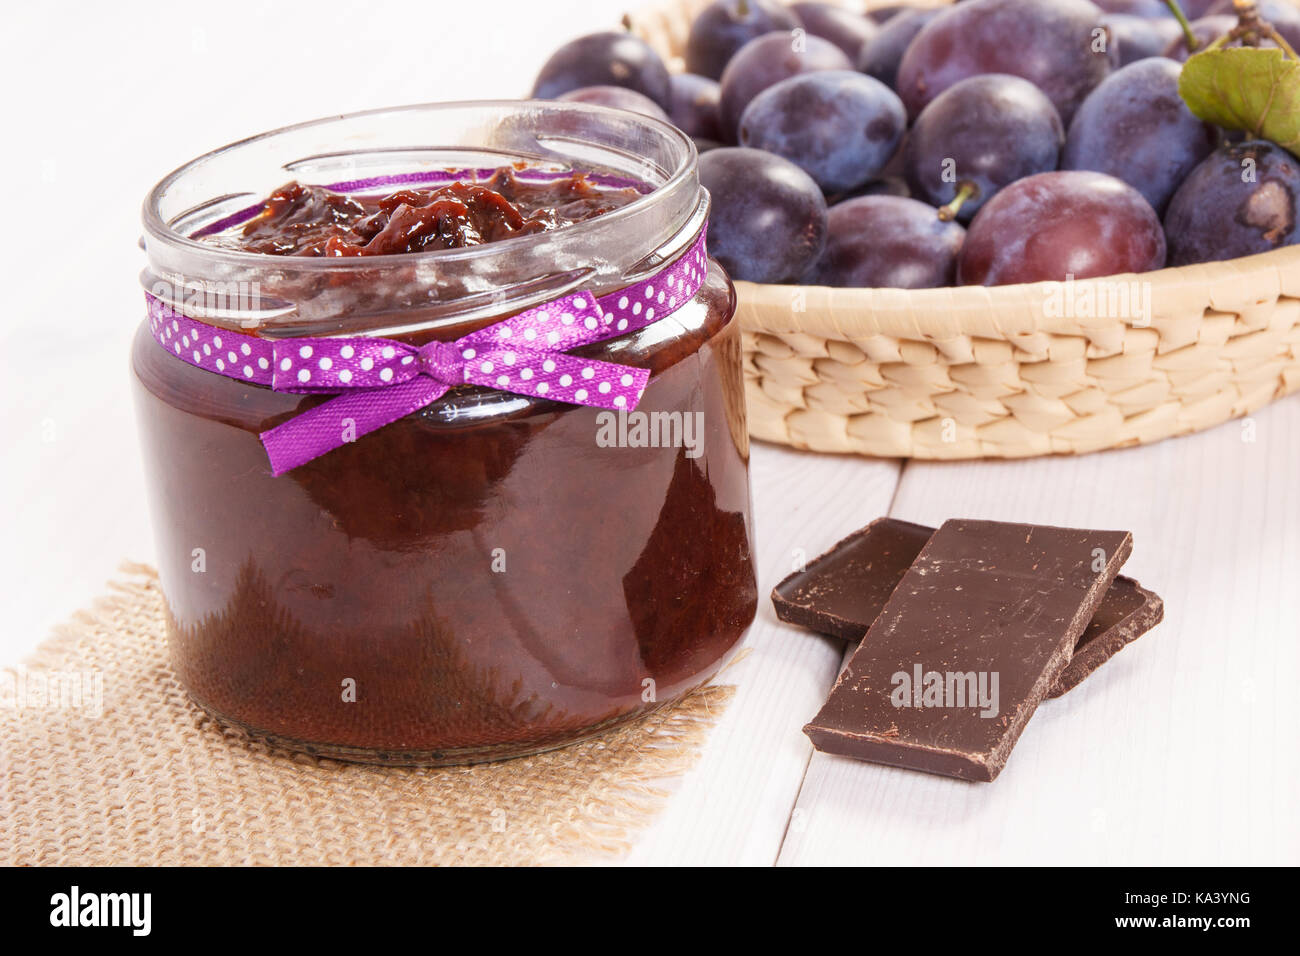 Fresh plum jam or marmalade in glass jar, ripe fruits in wicker basket and chocolate, concept of healthy sweet dessert Stock Photo